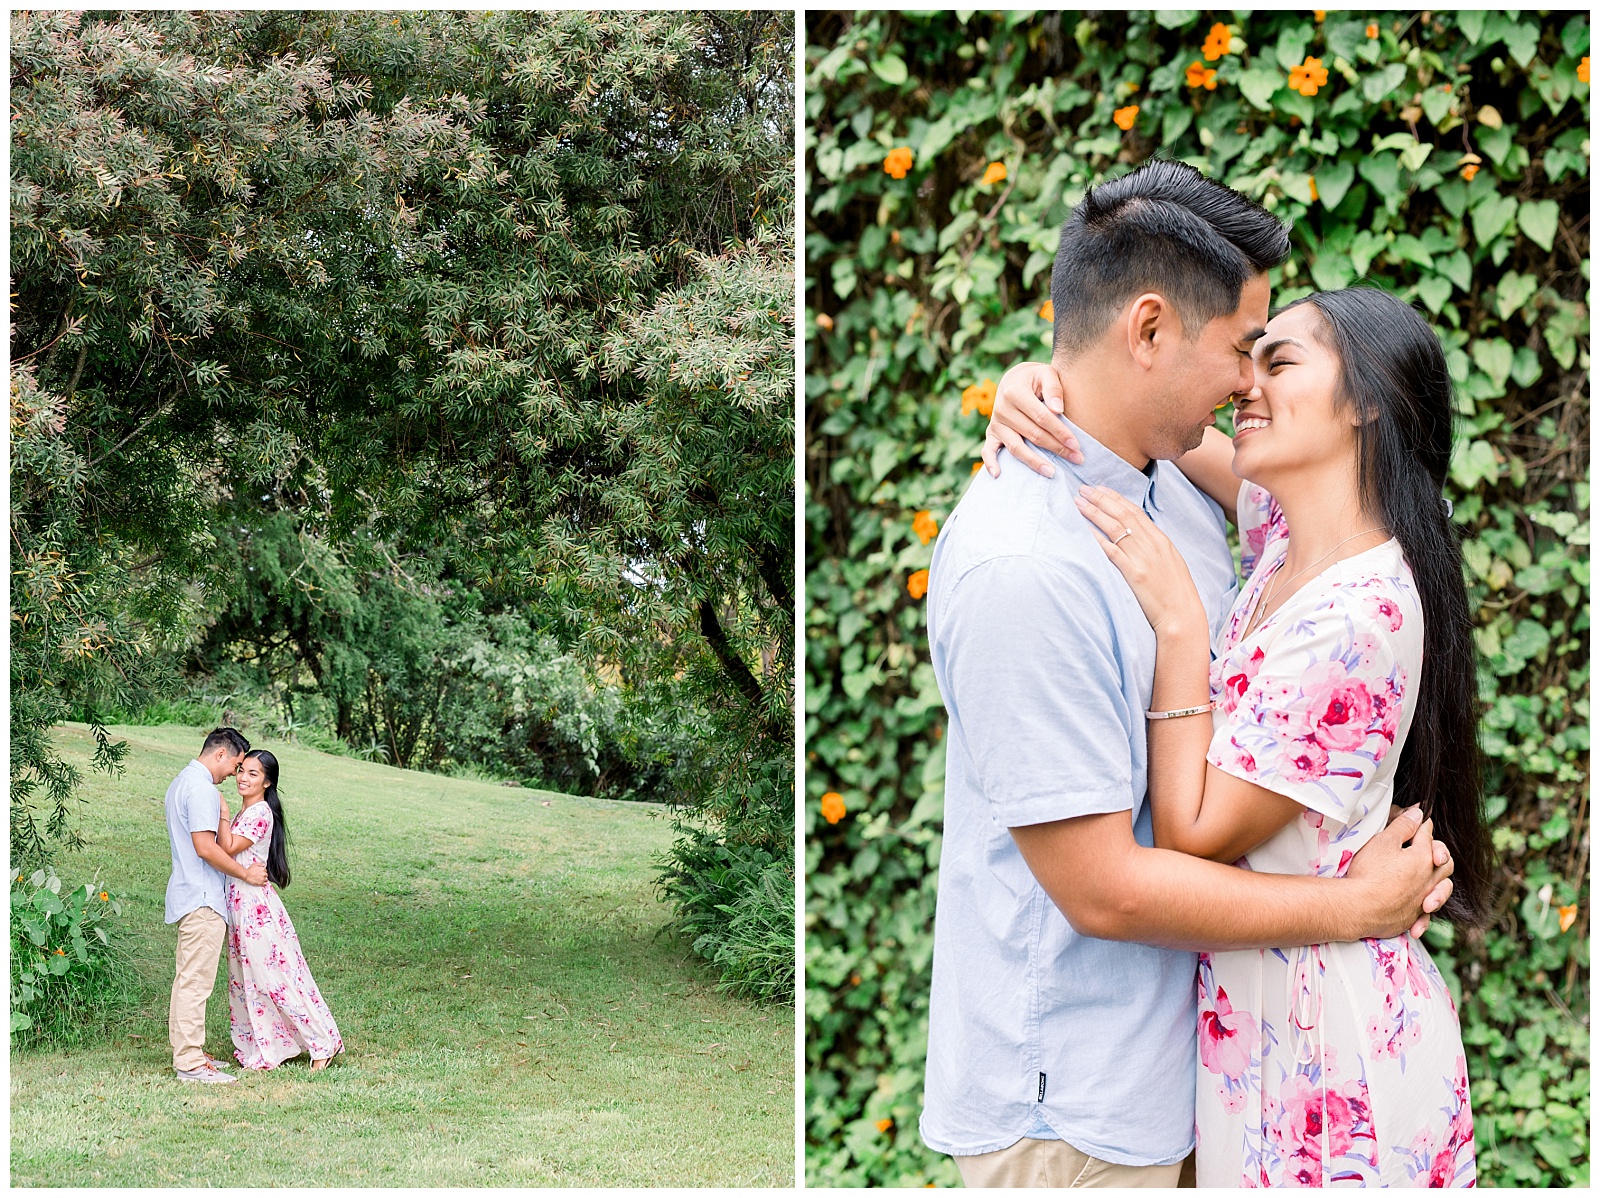 Gorgeous couple snuggling and kissing under vibrant trees with vines in background at Maui Hawaii Engagement-Kula Botanical Gardens Engagement - Ali'i Kula Lavendar Farm Engagement | Maui Hawaii and Destination, Engagement, Elopement and Wedding Photographer Monica Roberts Photography | www.monicaroberts.com